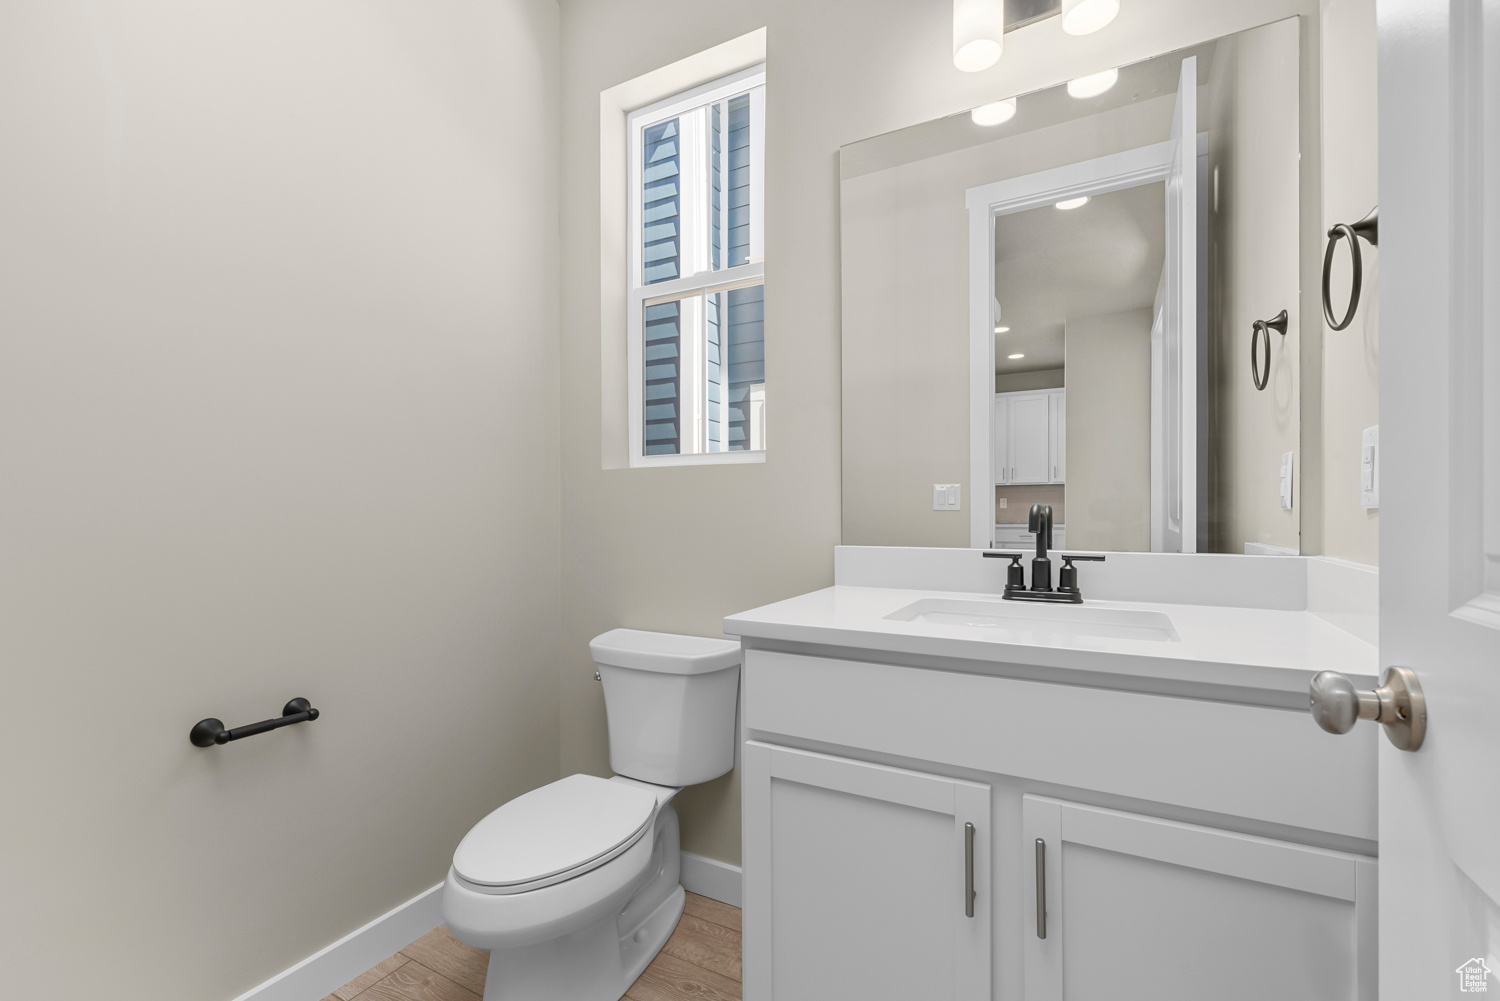 Bathroom with toilet, hardwood / wood-style flooring, vanity, and a healthy amount of sunlight